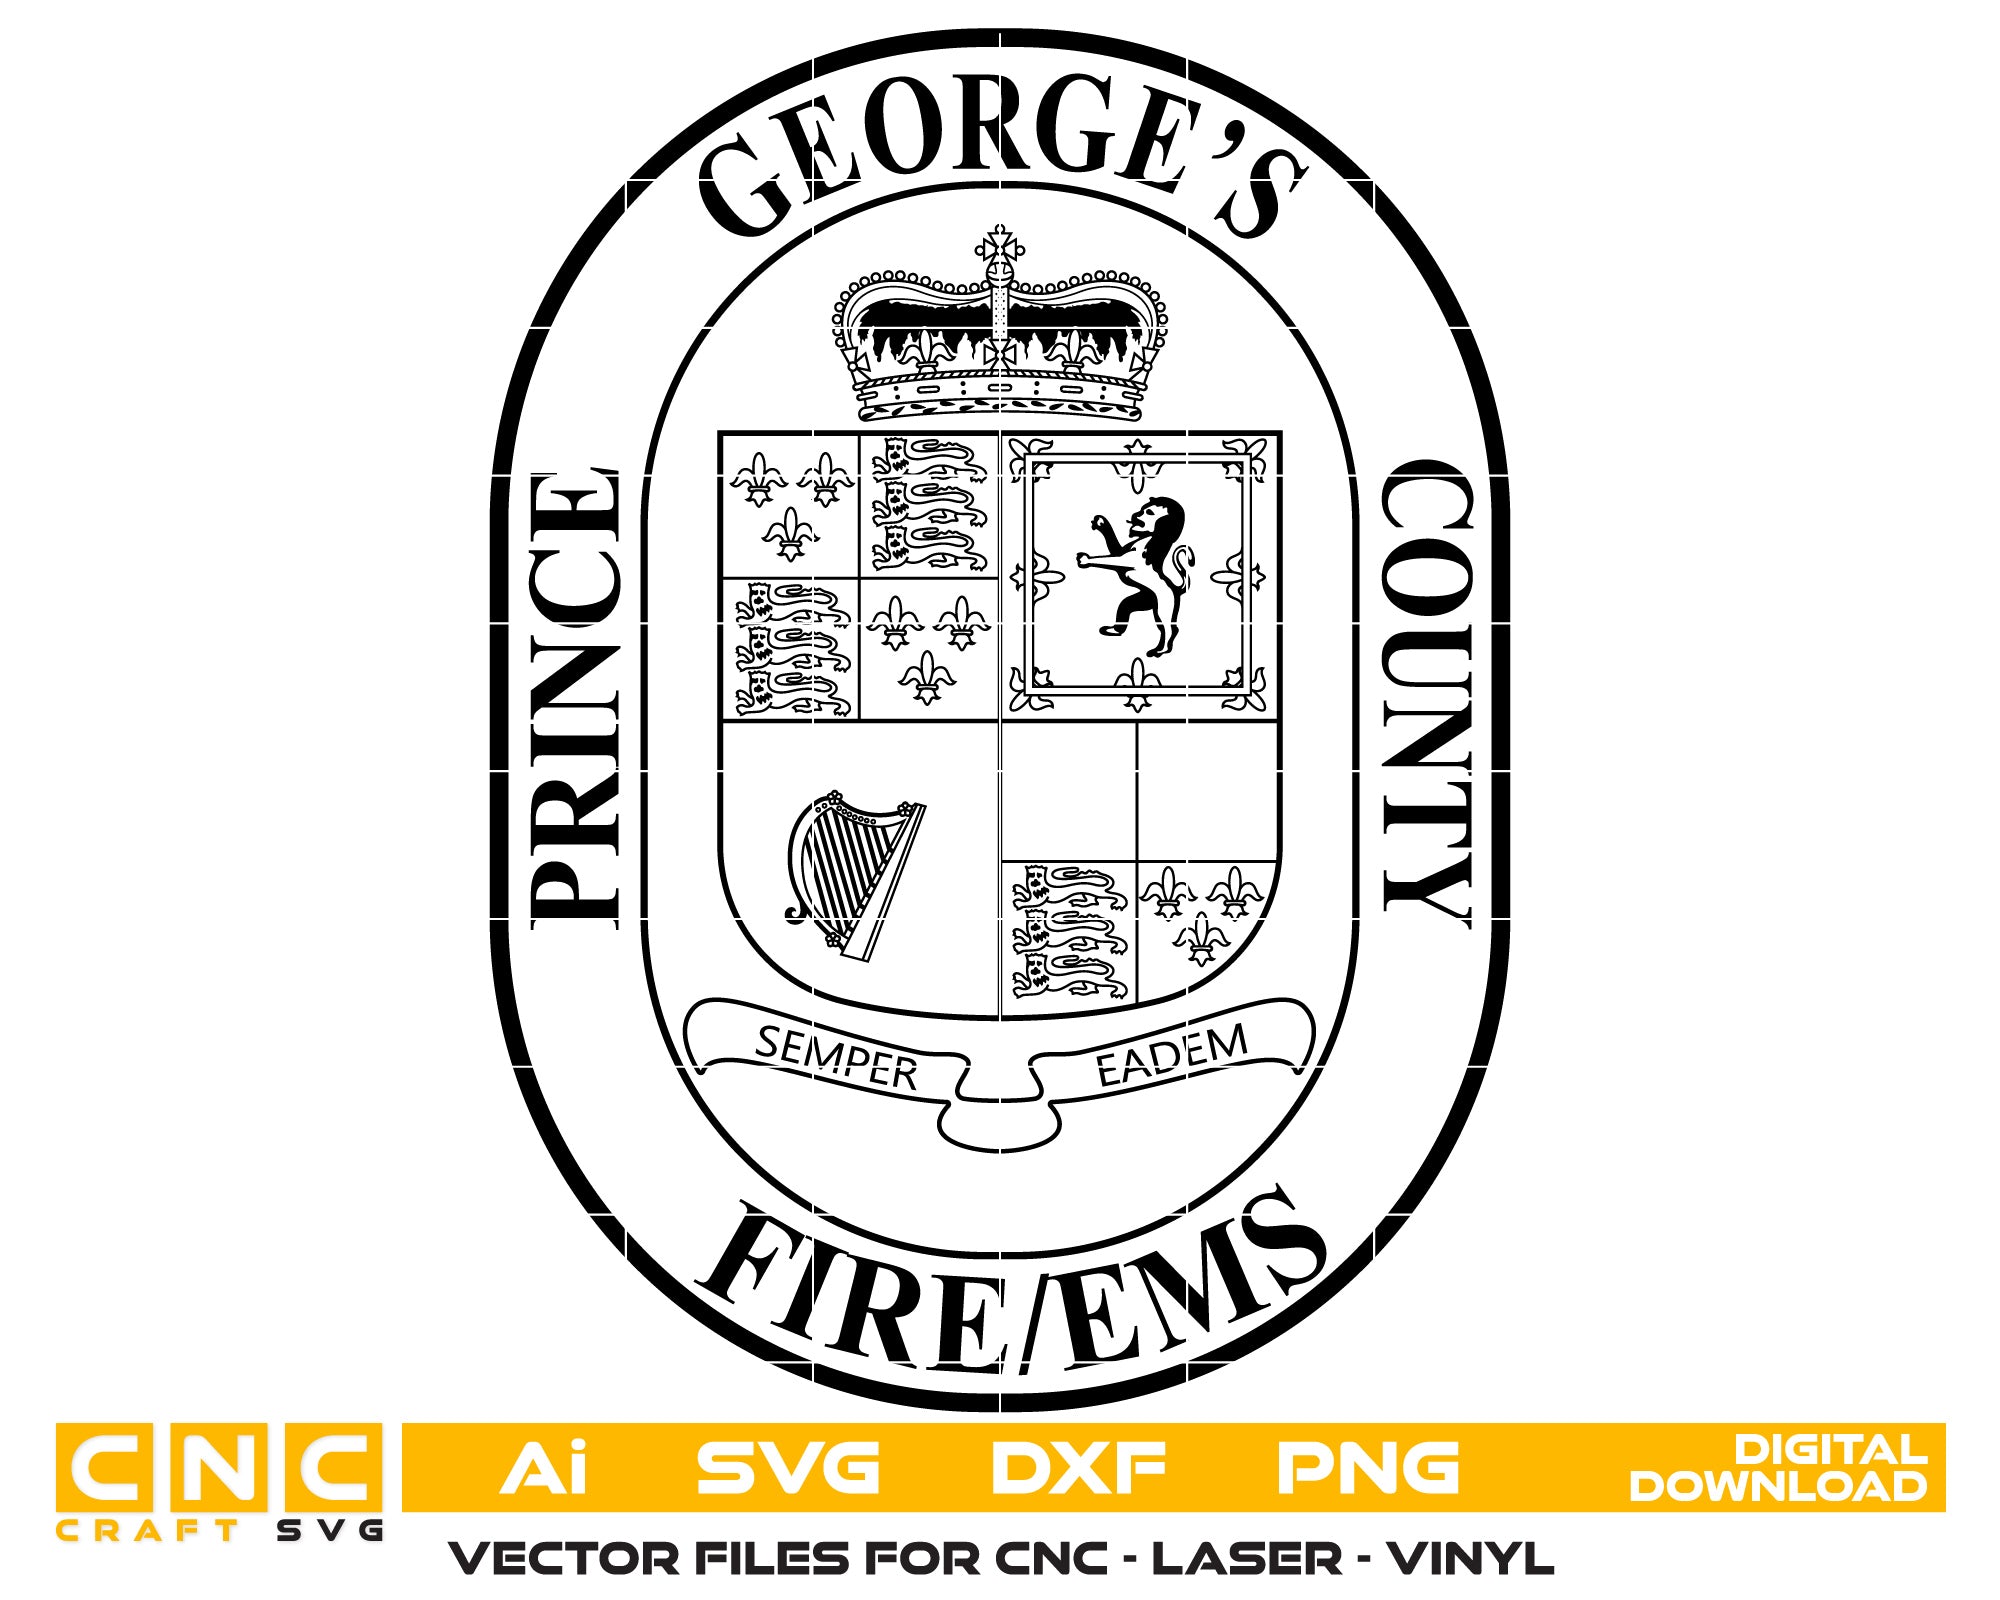 George County Fire logo Vector Art, Ai,SVG, DXF, PNG, Digital Files